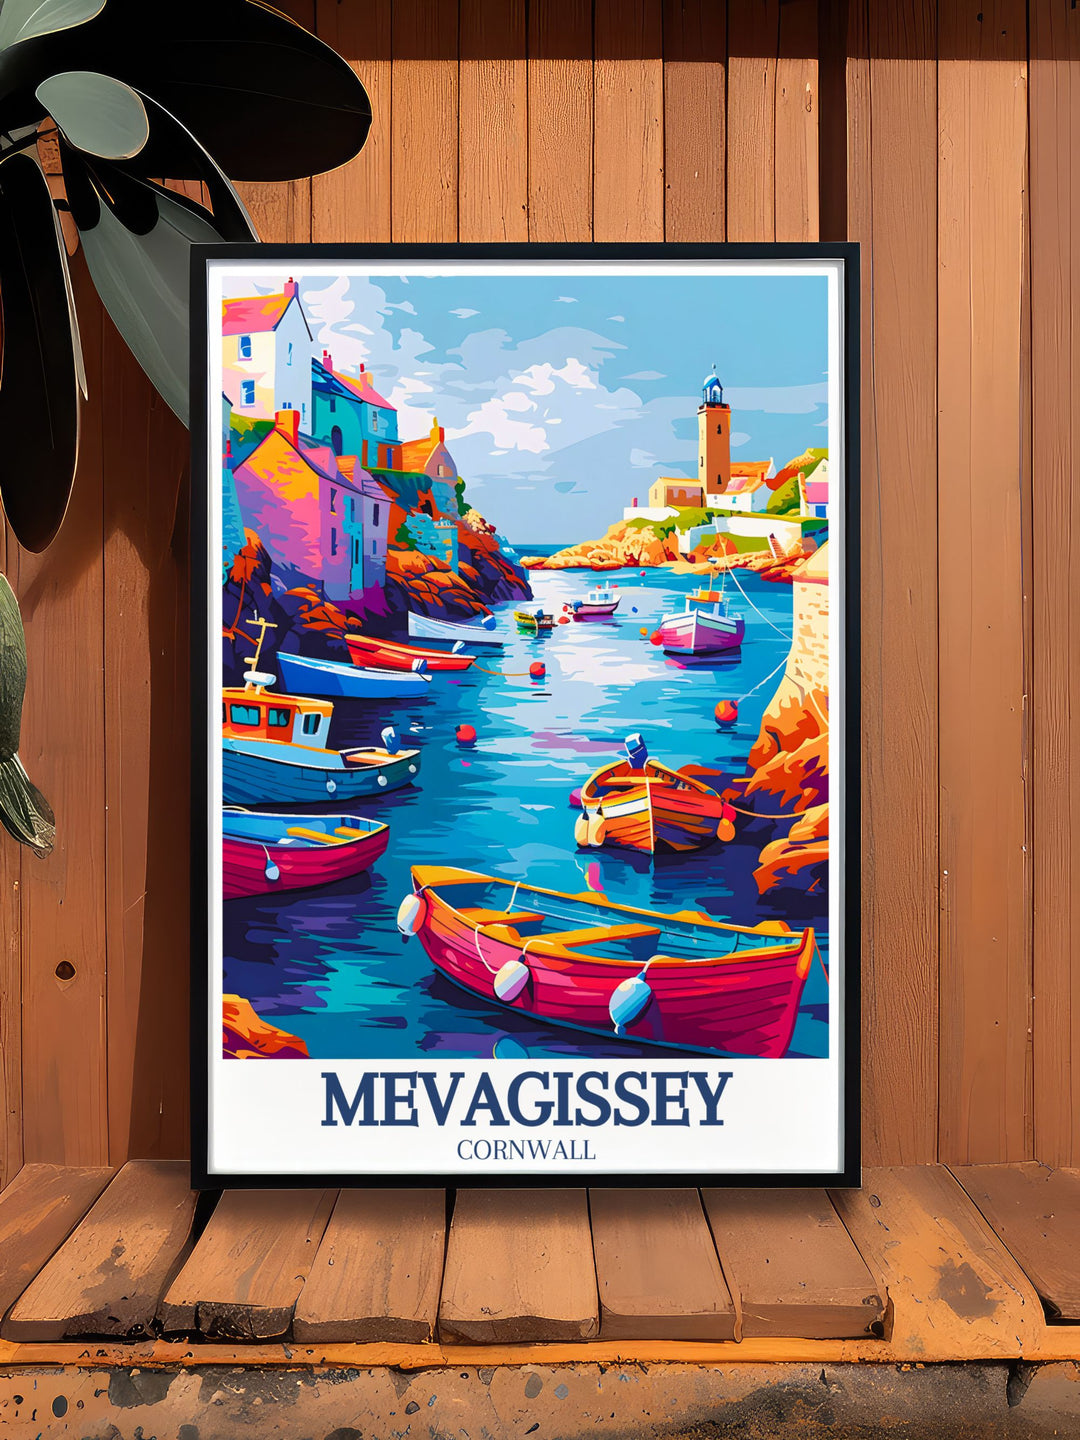 Featuring the rich history of Mevagissey, this travel poster captures the significance of its iconic landmarks like the Clock Tower and St. Peters Church. Perfect for history buffs and those who love preserved heritage, this artwork brings the timeless charm of Mevagissey into your decor.